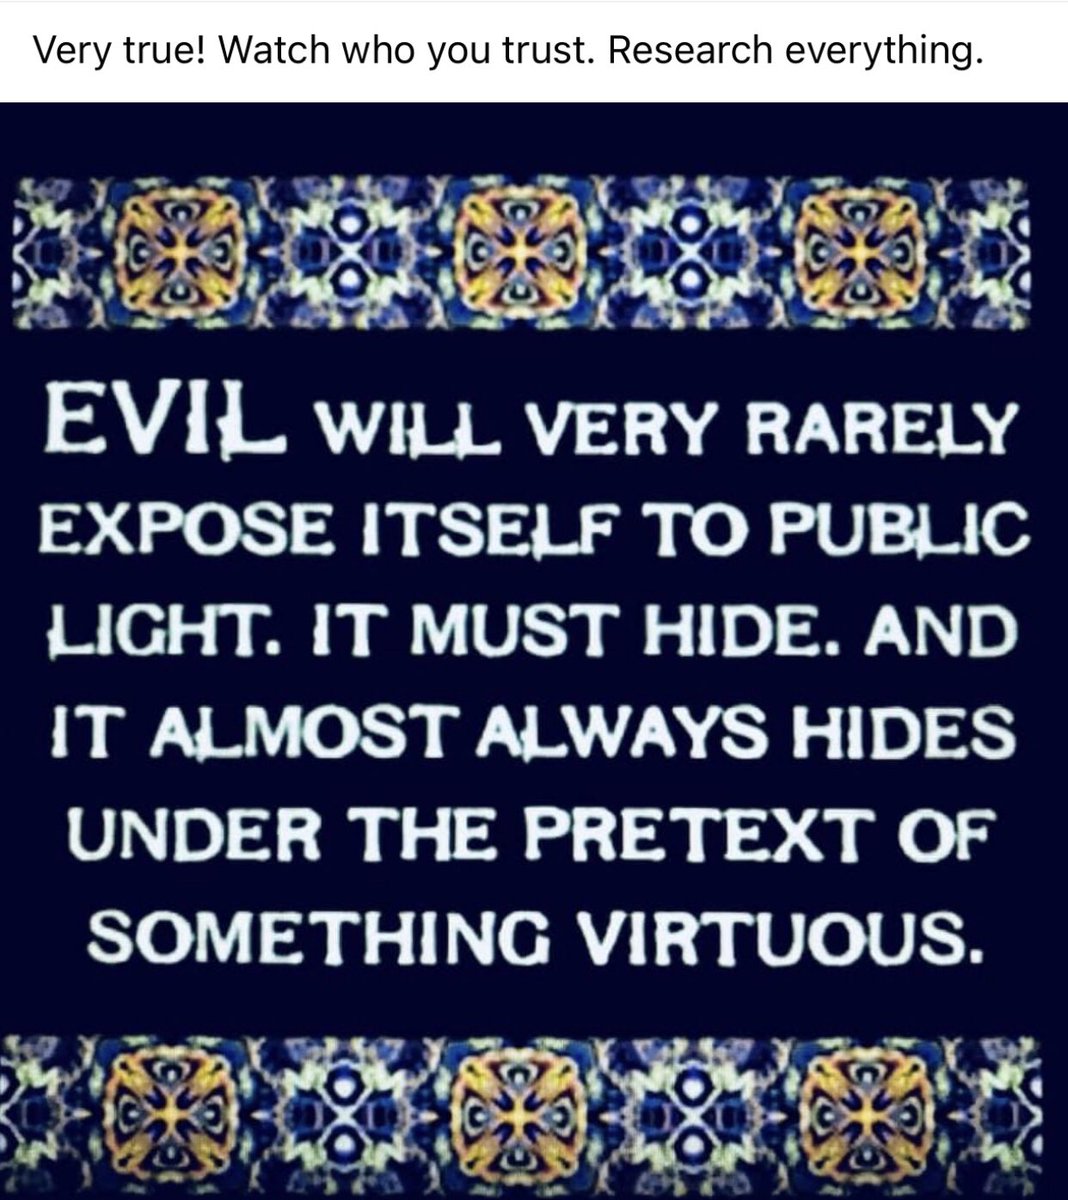 #researcheverything #questioneverything #life #watchwhoyoutrust #keepyourcirclesmall #exposeevil #evil #bethelight #theufosecret